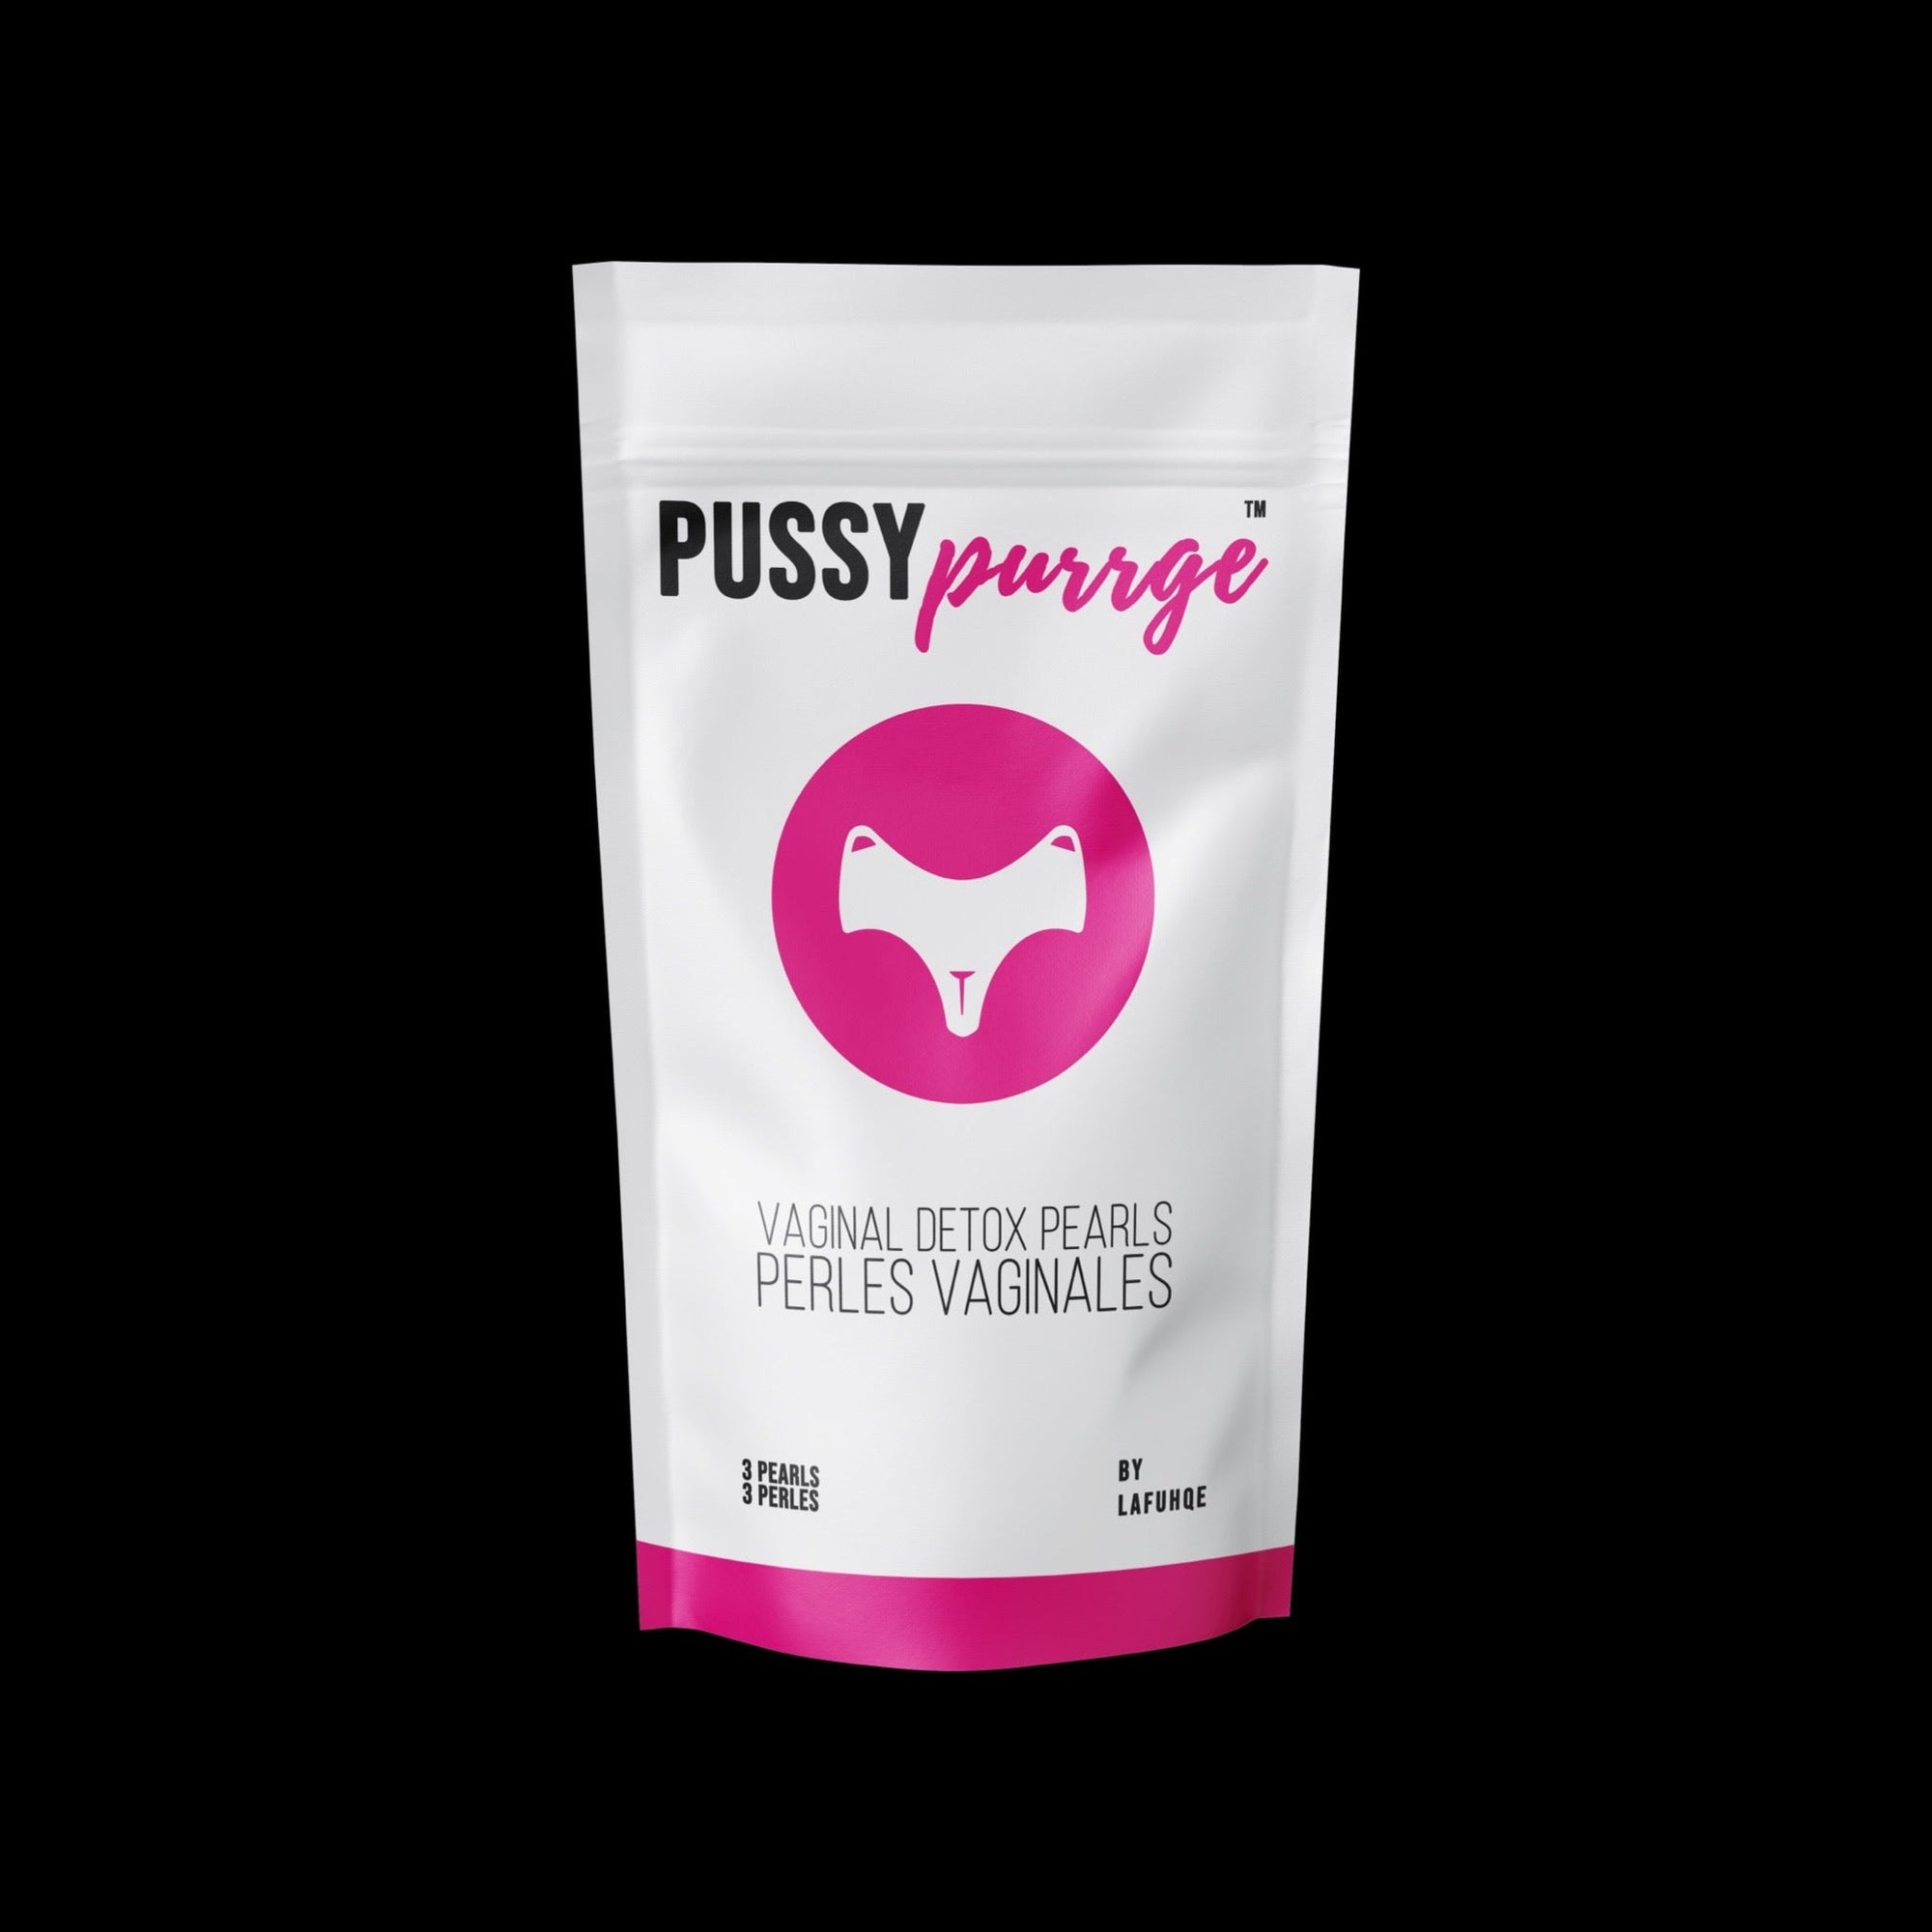 steam her & pussy purrge ®